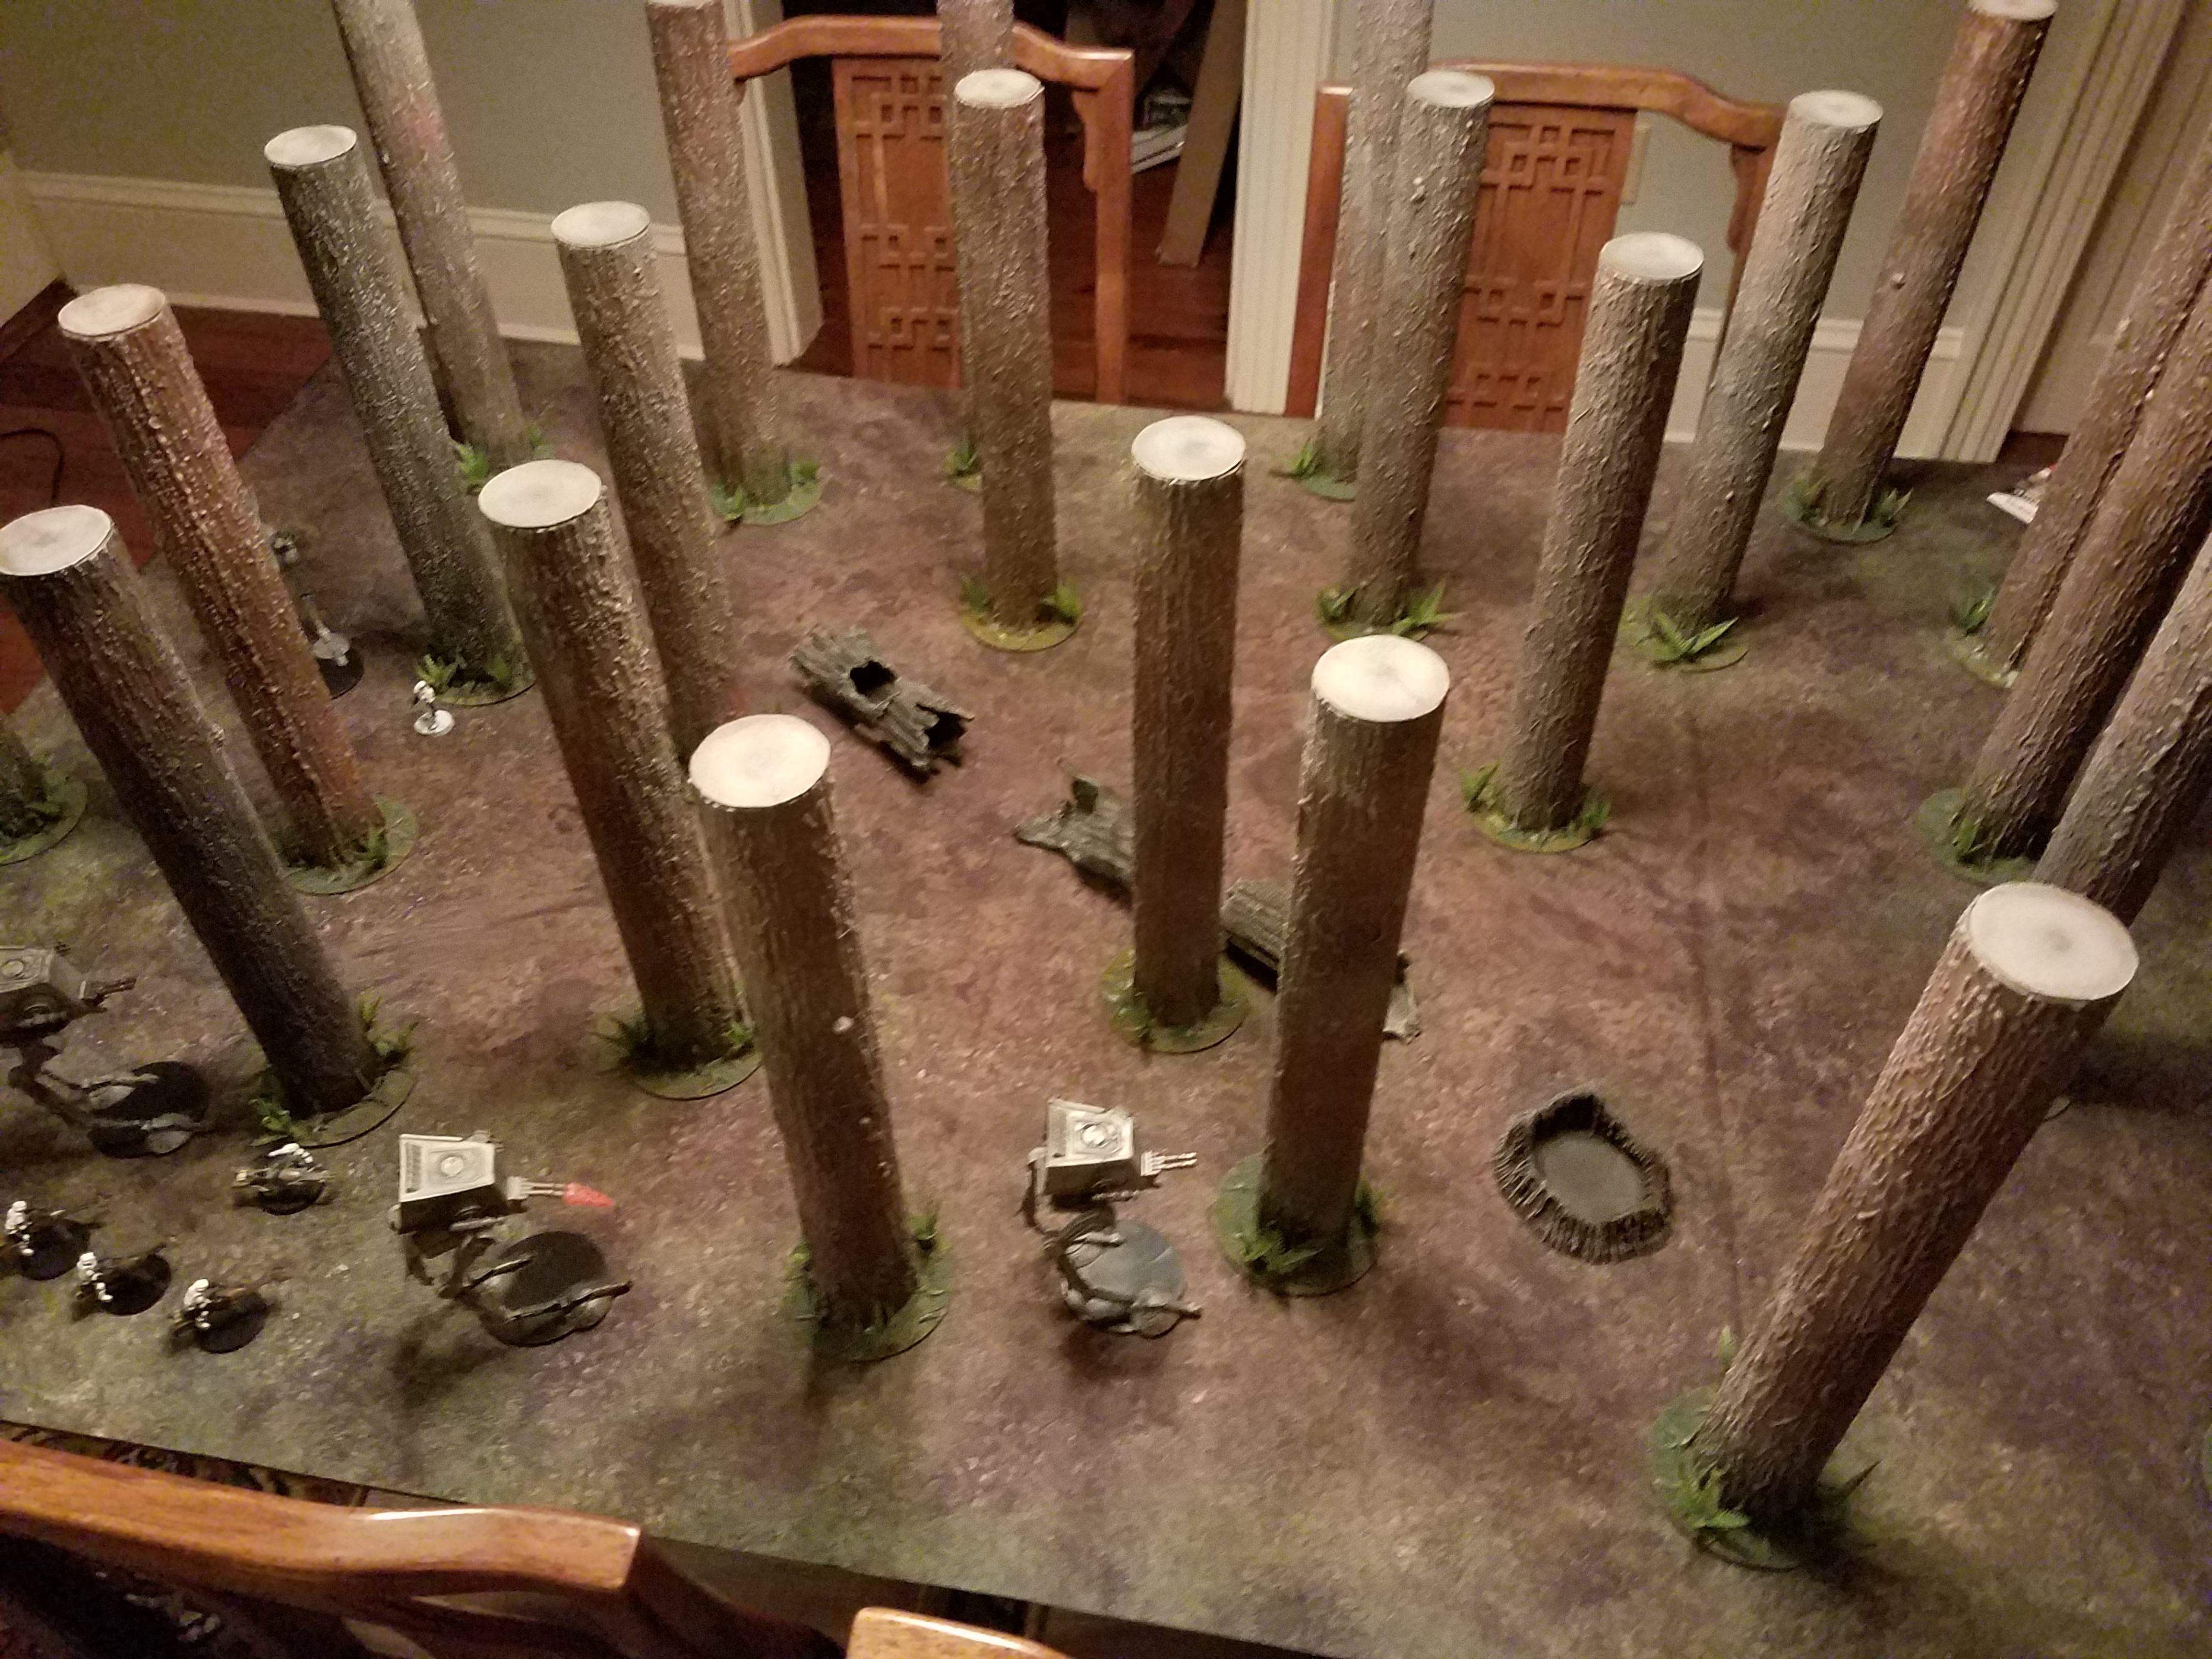 Endor Forest trees